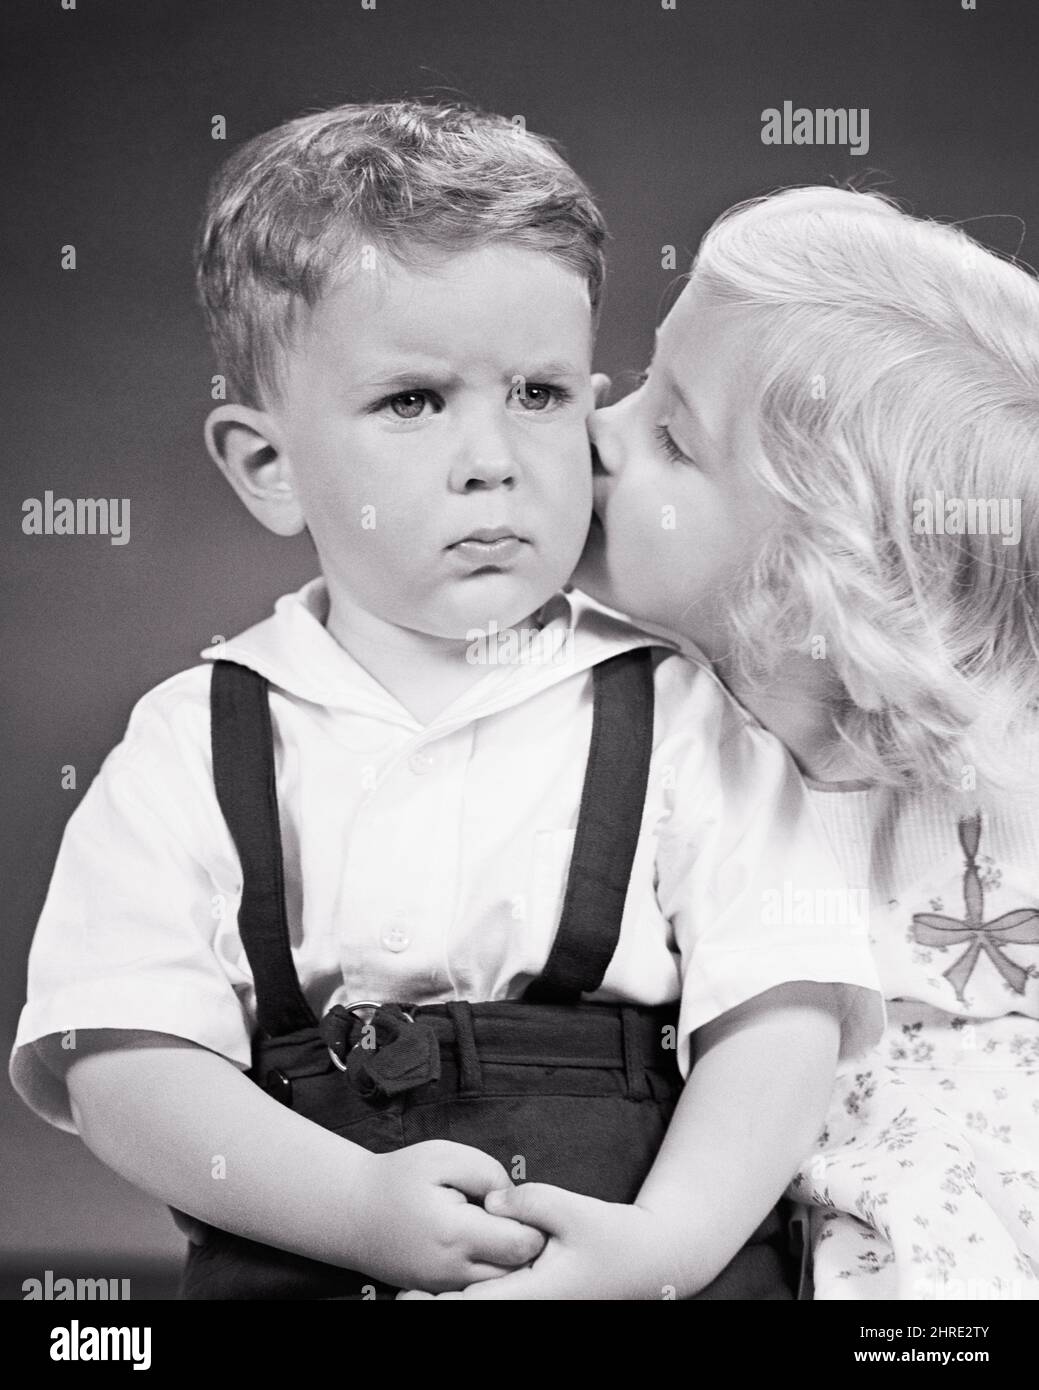 1940s LITTLE BLONDE GIRL KISSING HER SAD GRUMPY BABY BROTHER ON ...